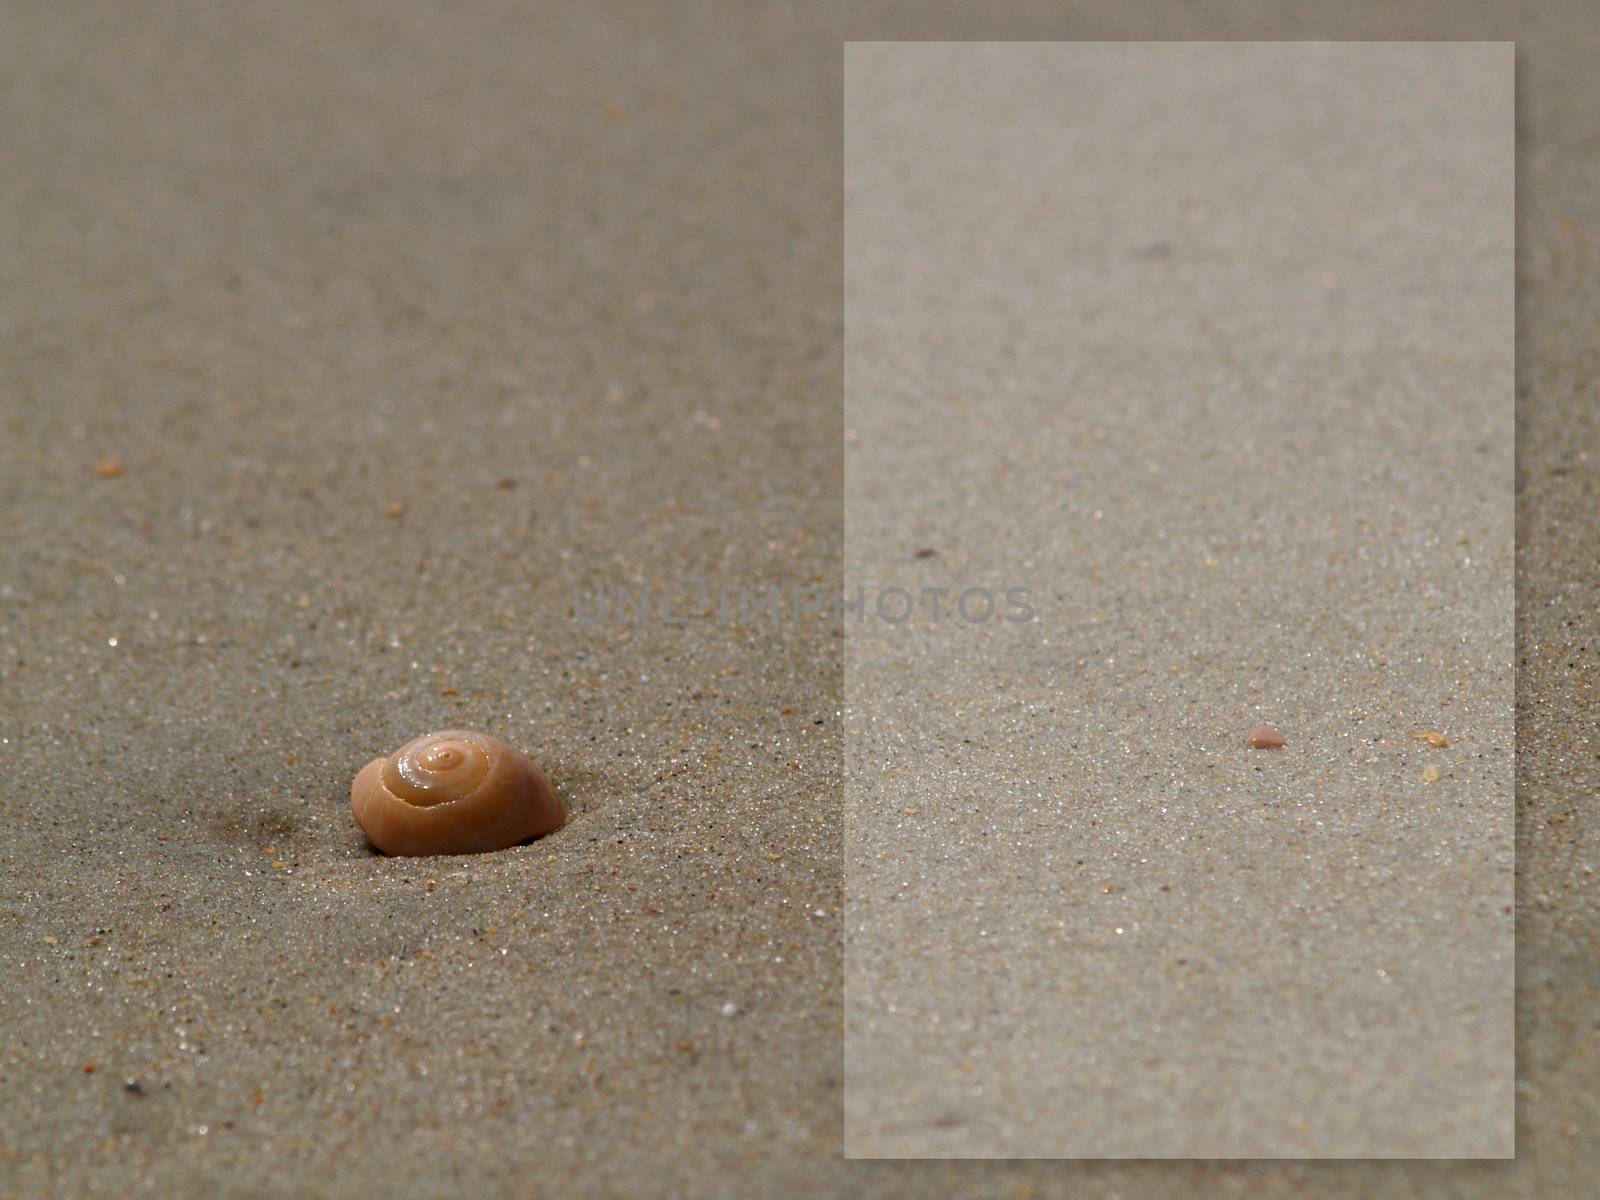 Spiral shell on a sandy beach with a short depth of field and a text box